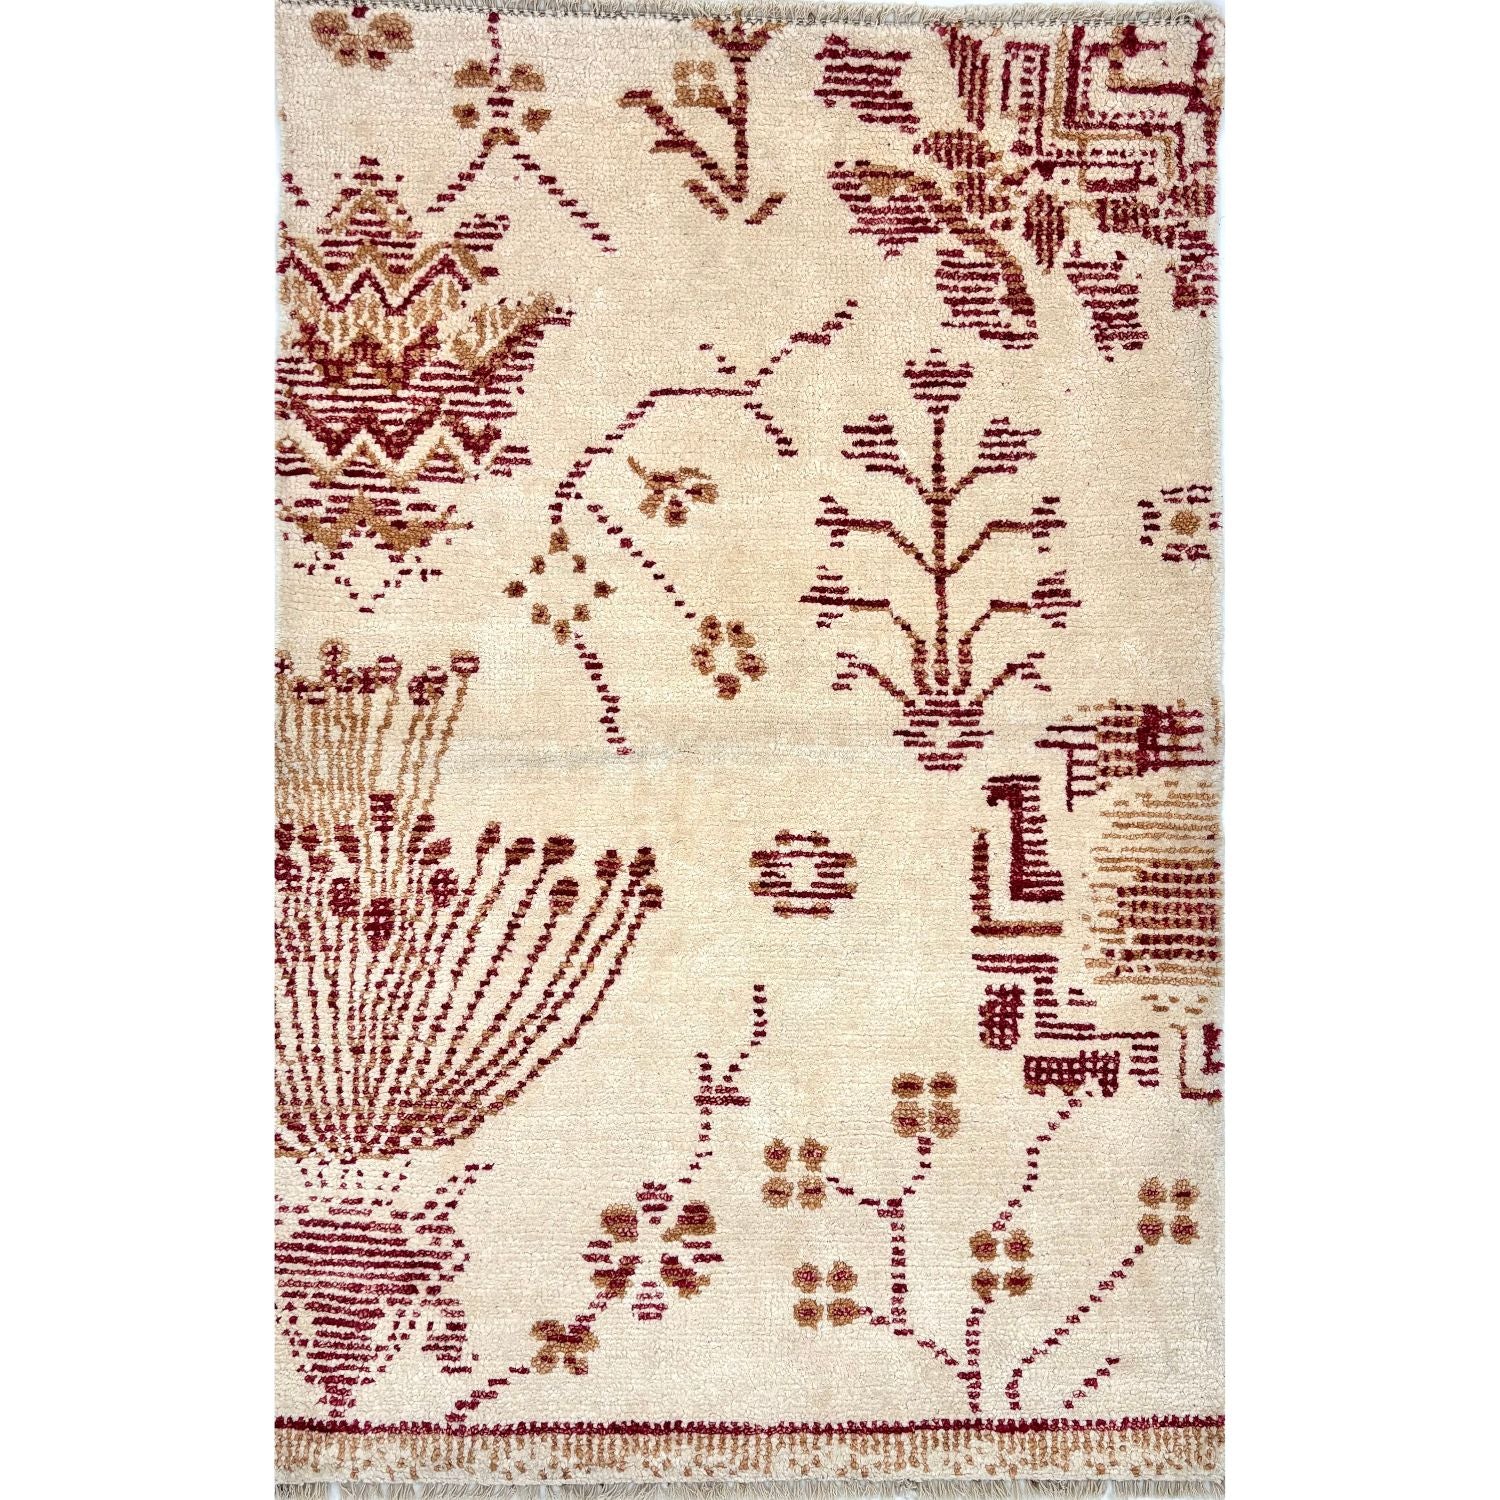 A rug with an ivory background and dark red and gold gforal pattern